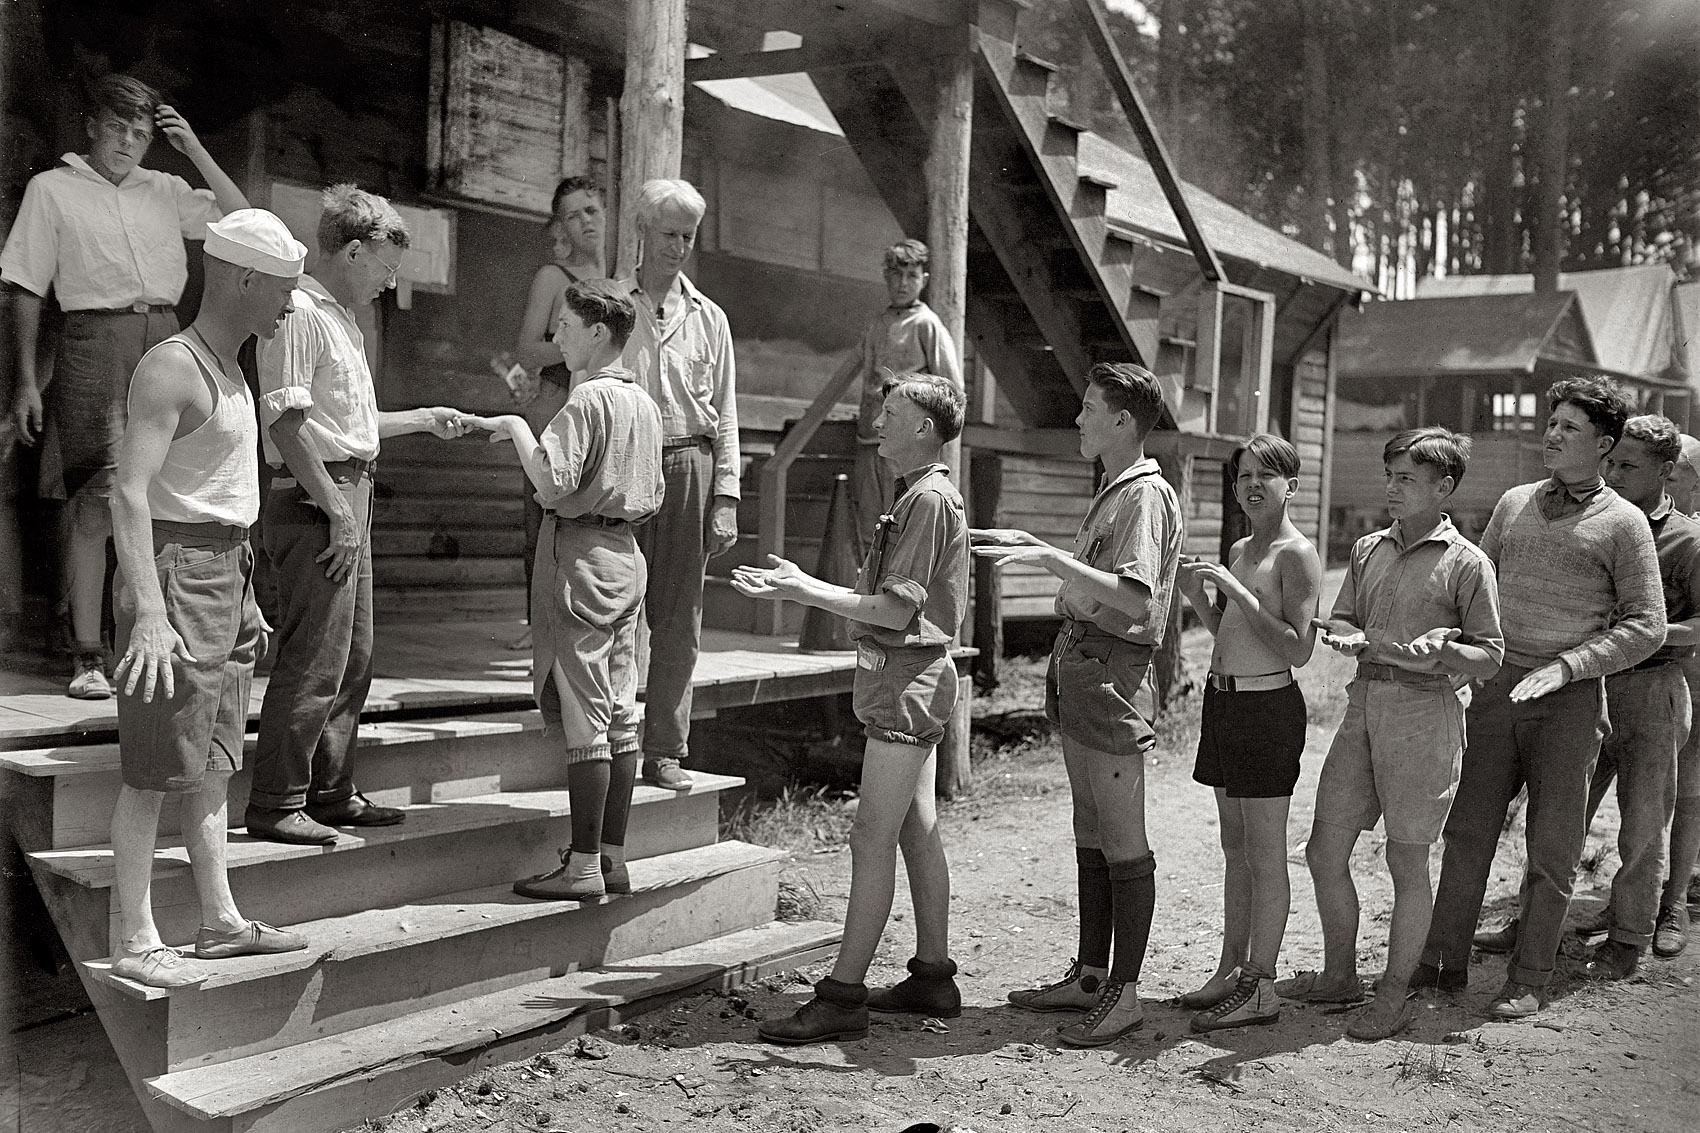 July 9, 1925. "Boys Scouts at Camp Roosevelt." View full size. National Photo Company Collection glass negative, Library of Congress.